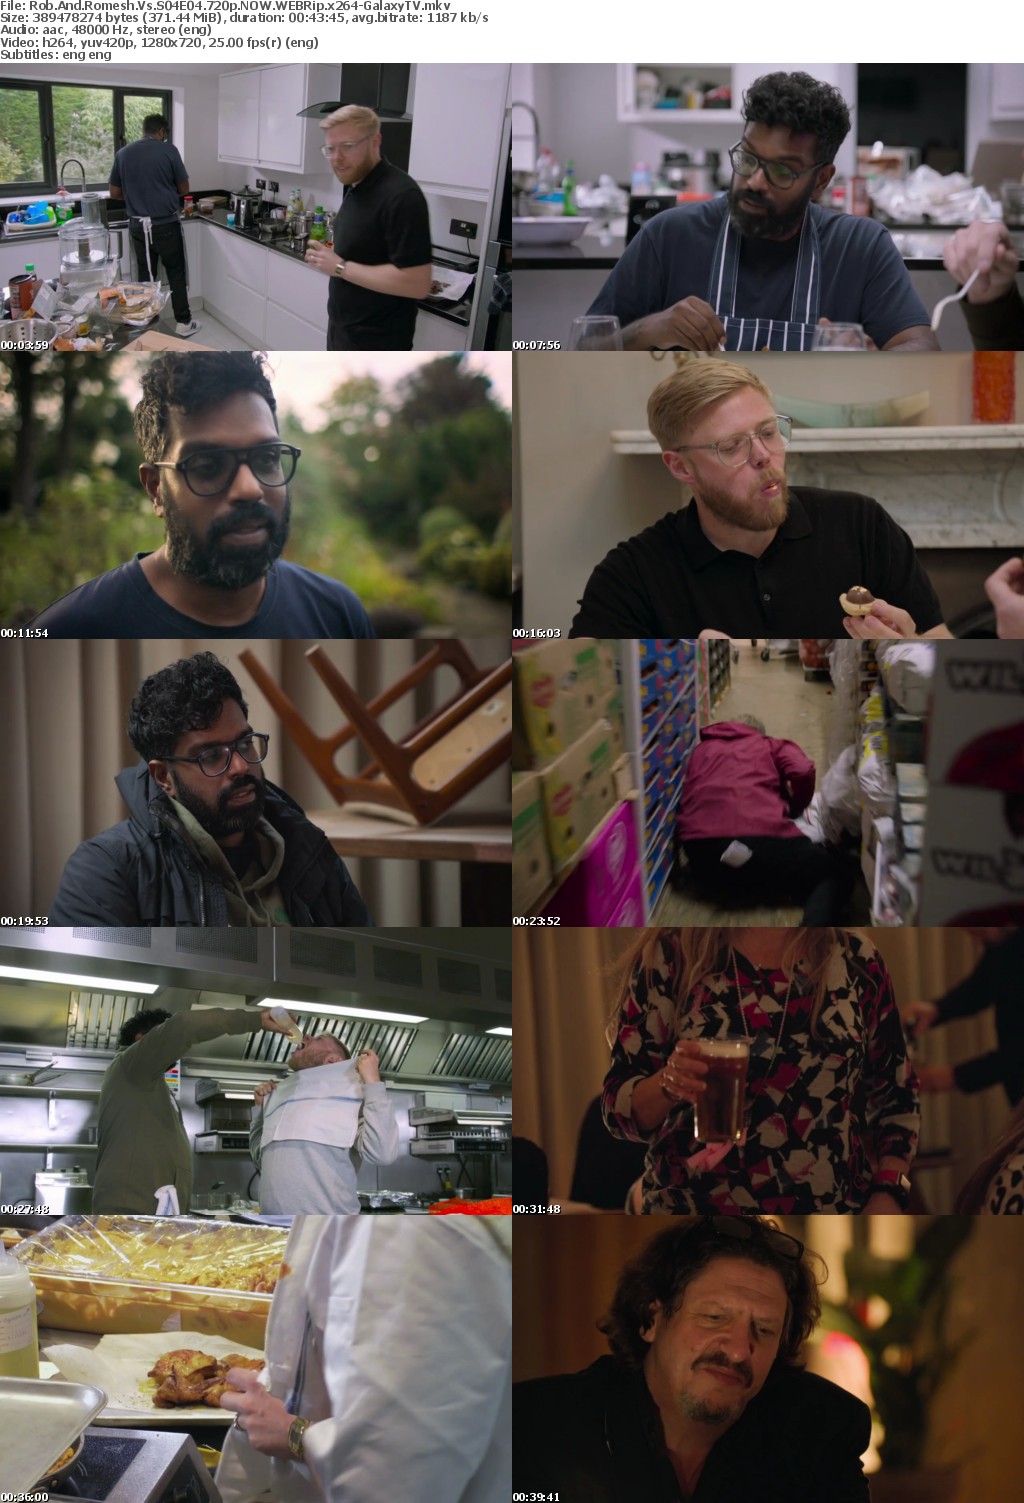 Rob And Romesh Vs S04 COMPLETE 720p NOW WEBRip x264-GalaxyTV